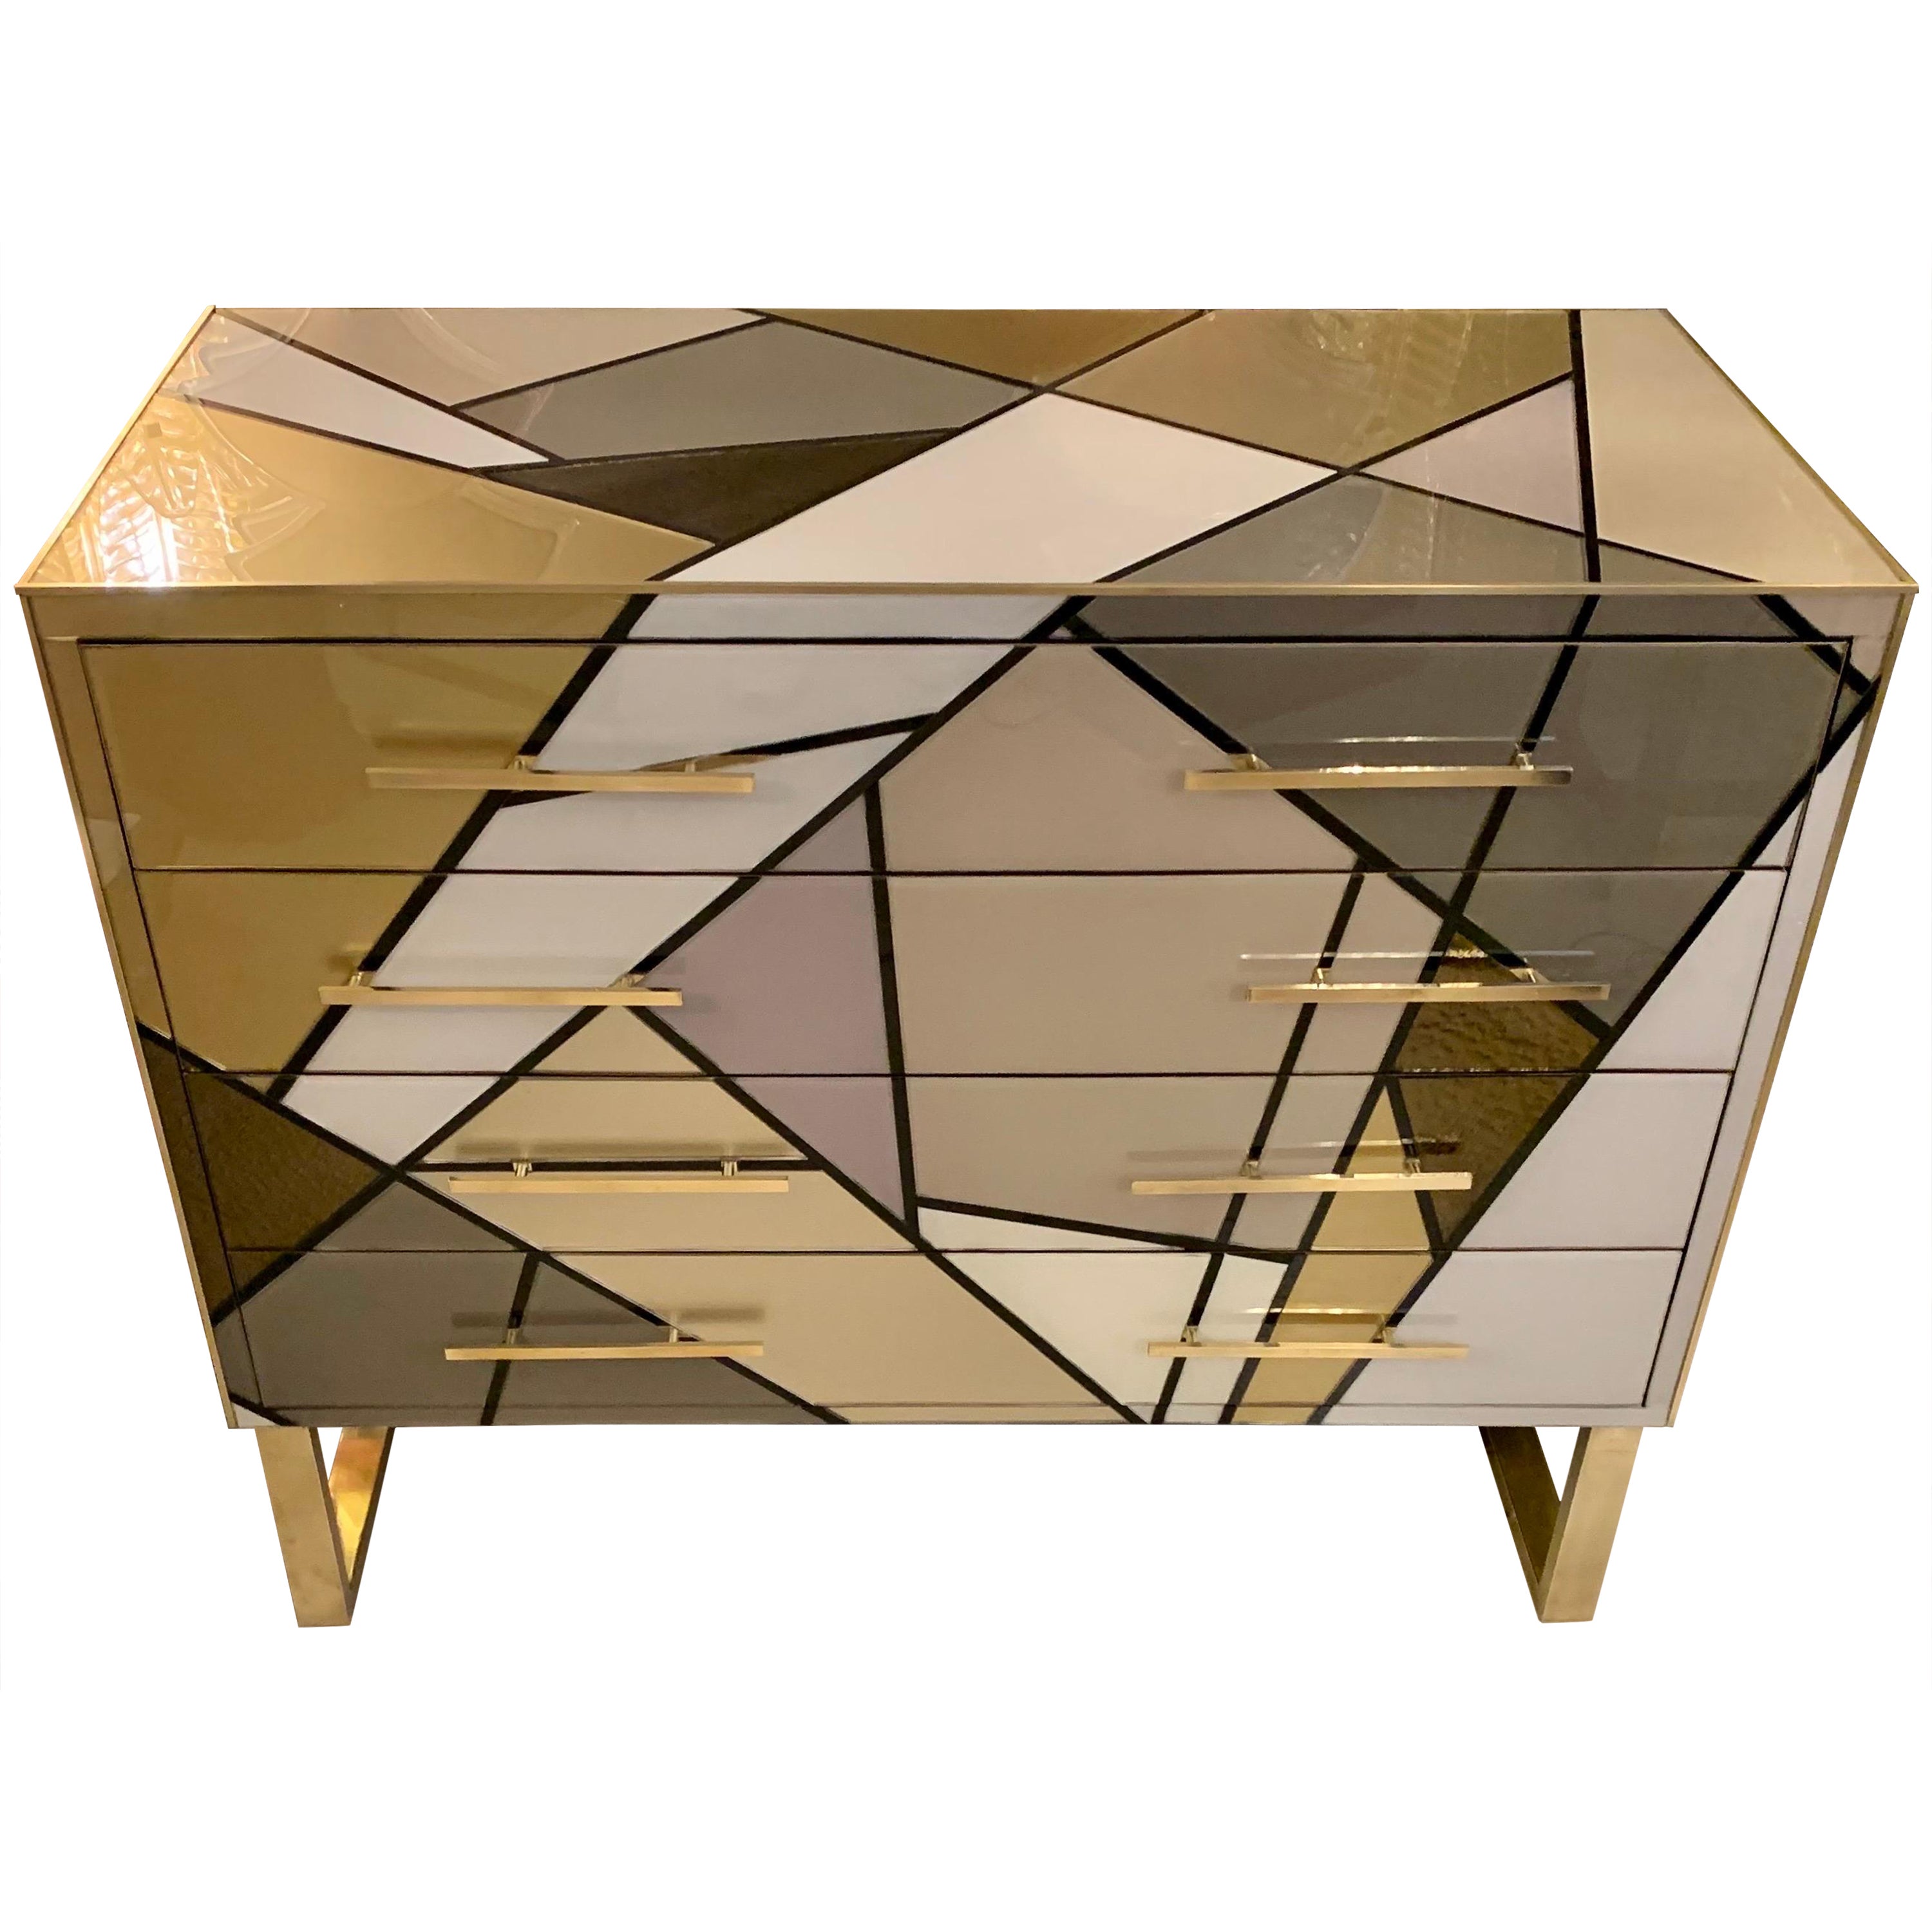 1980s Italian Multicolored Opaline Glass Chest of Drawers with Geometric Design For Sale